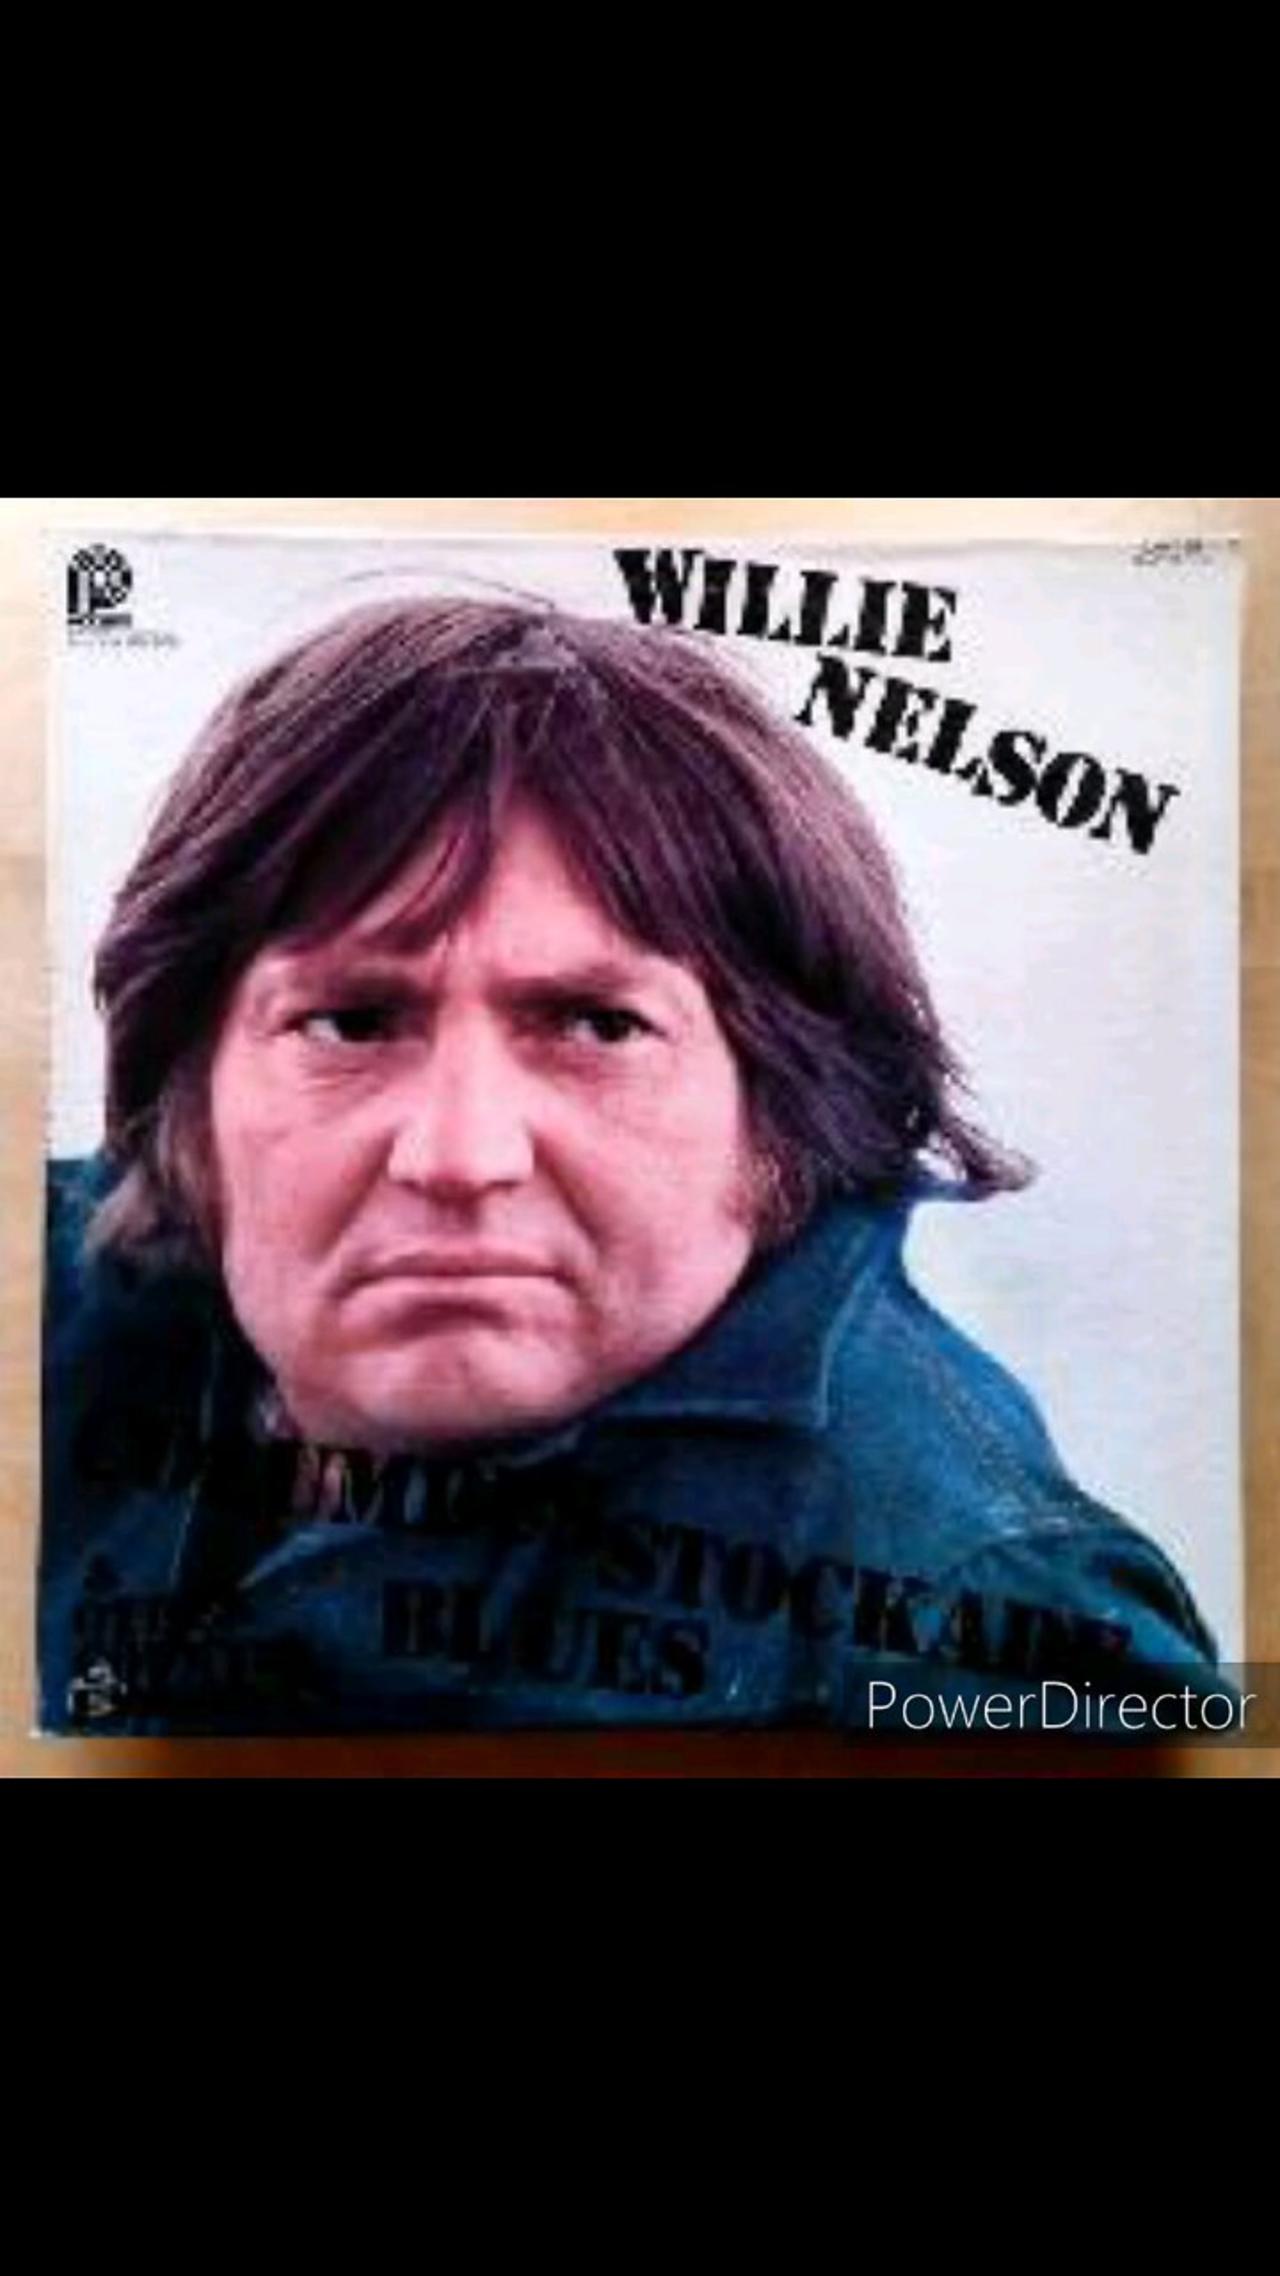 Willie Nelson - I Can't Find The Time